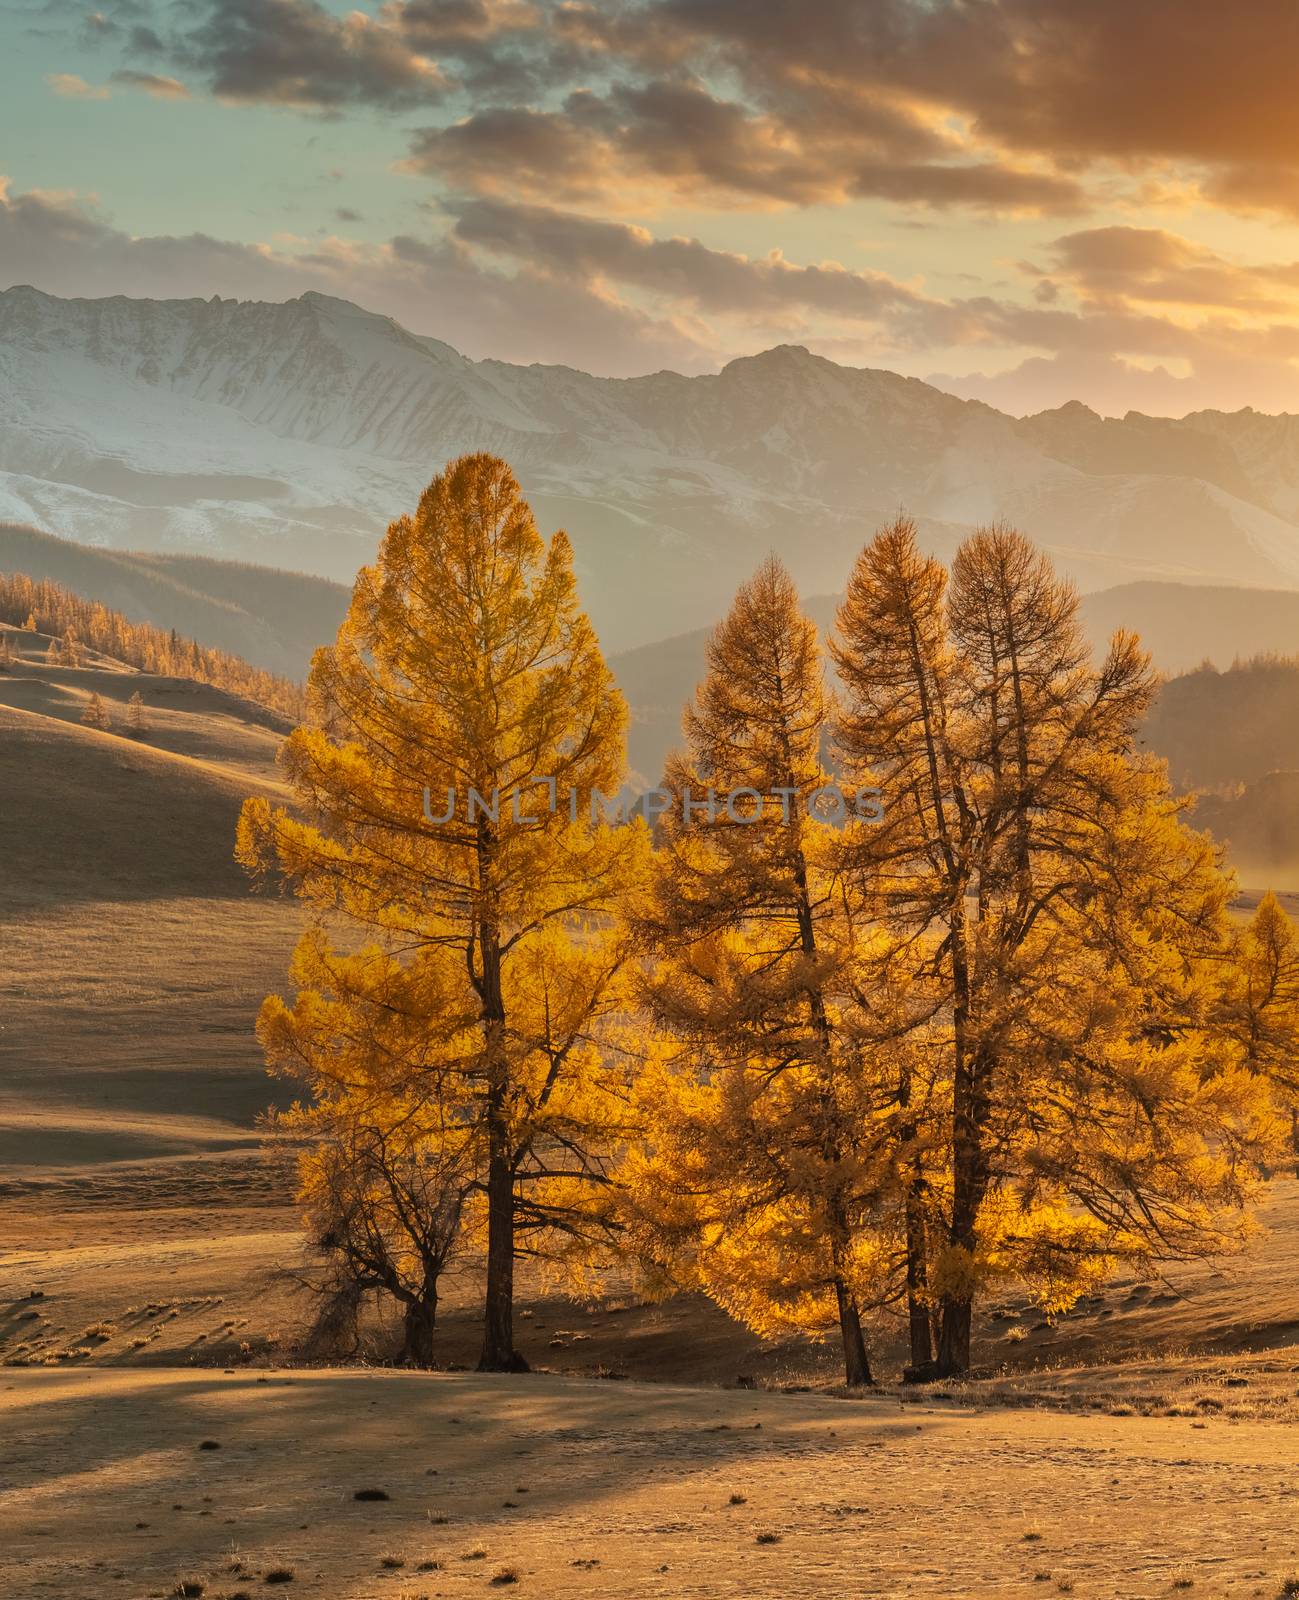 Beautiful portrait size shot of golden trees in the foreground, white snowy mountains and cloudy orange sky in the background. Fall time. Sunset. Altai mountains, Russia. Golden hour by DamantisZ